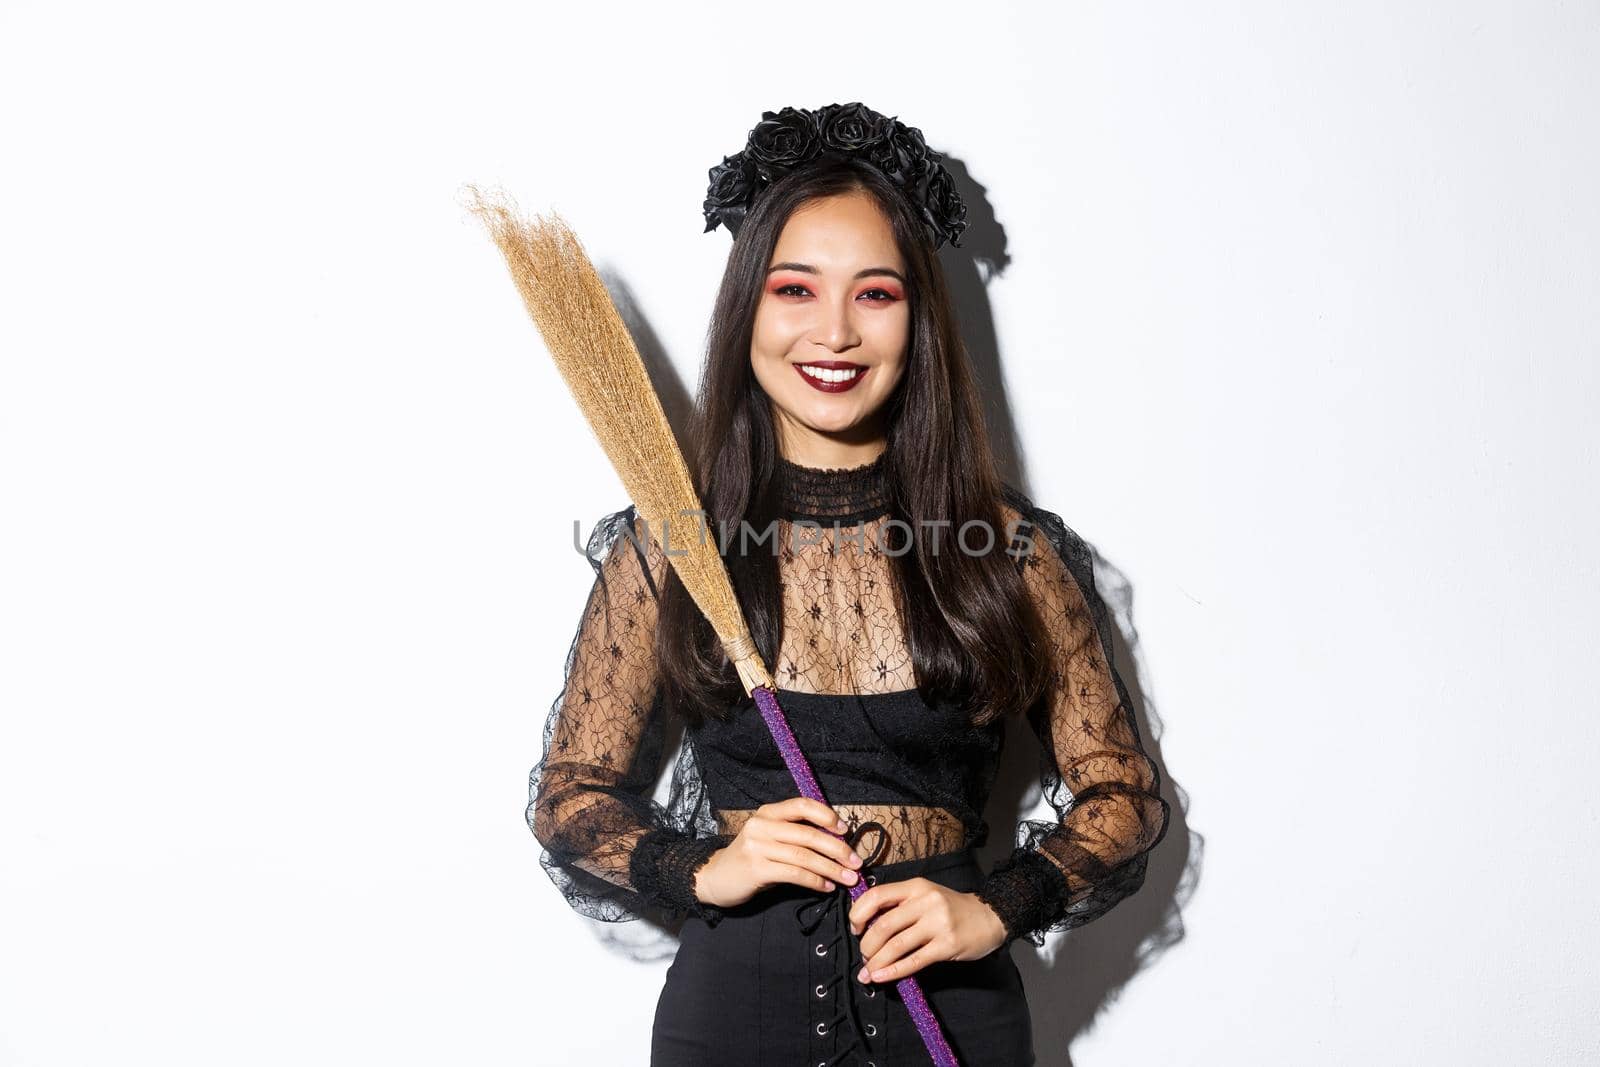 Portrait of smiling beautiful asian woman in witch costume holding broom and looking happy at camera, celebrating halloween, enjoying trick or treating, white background.